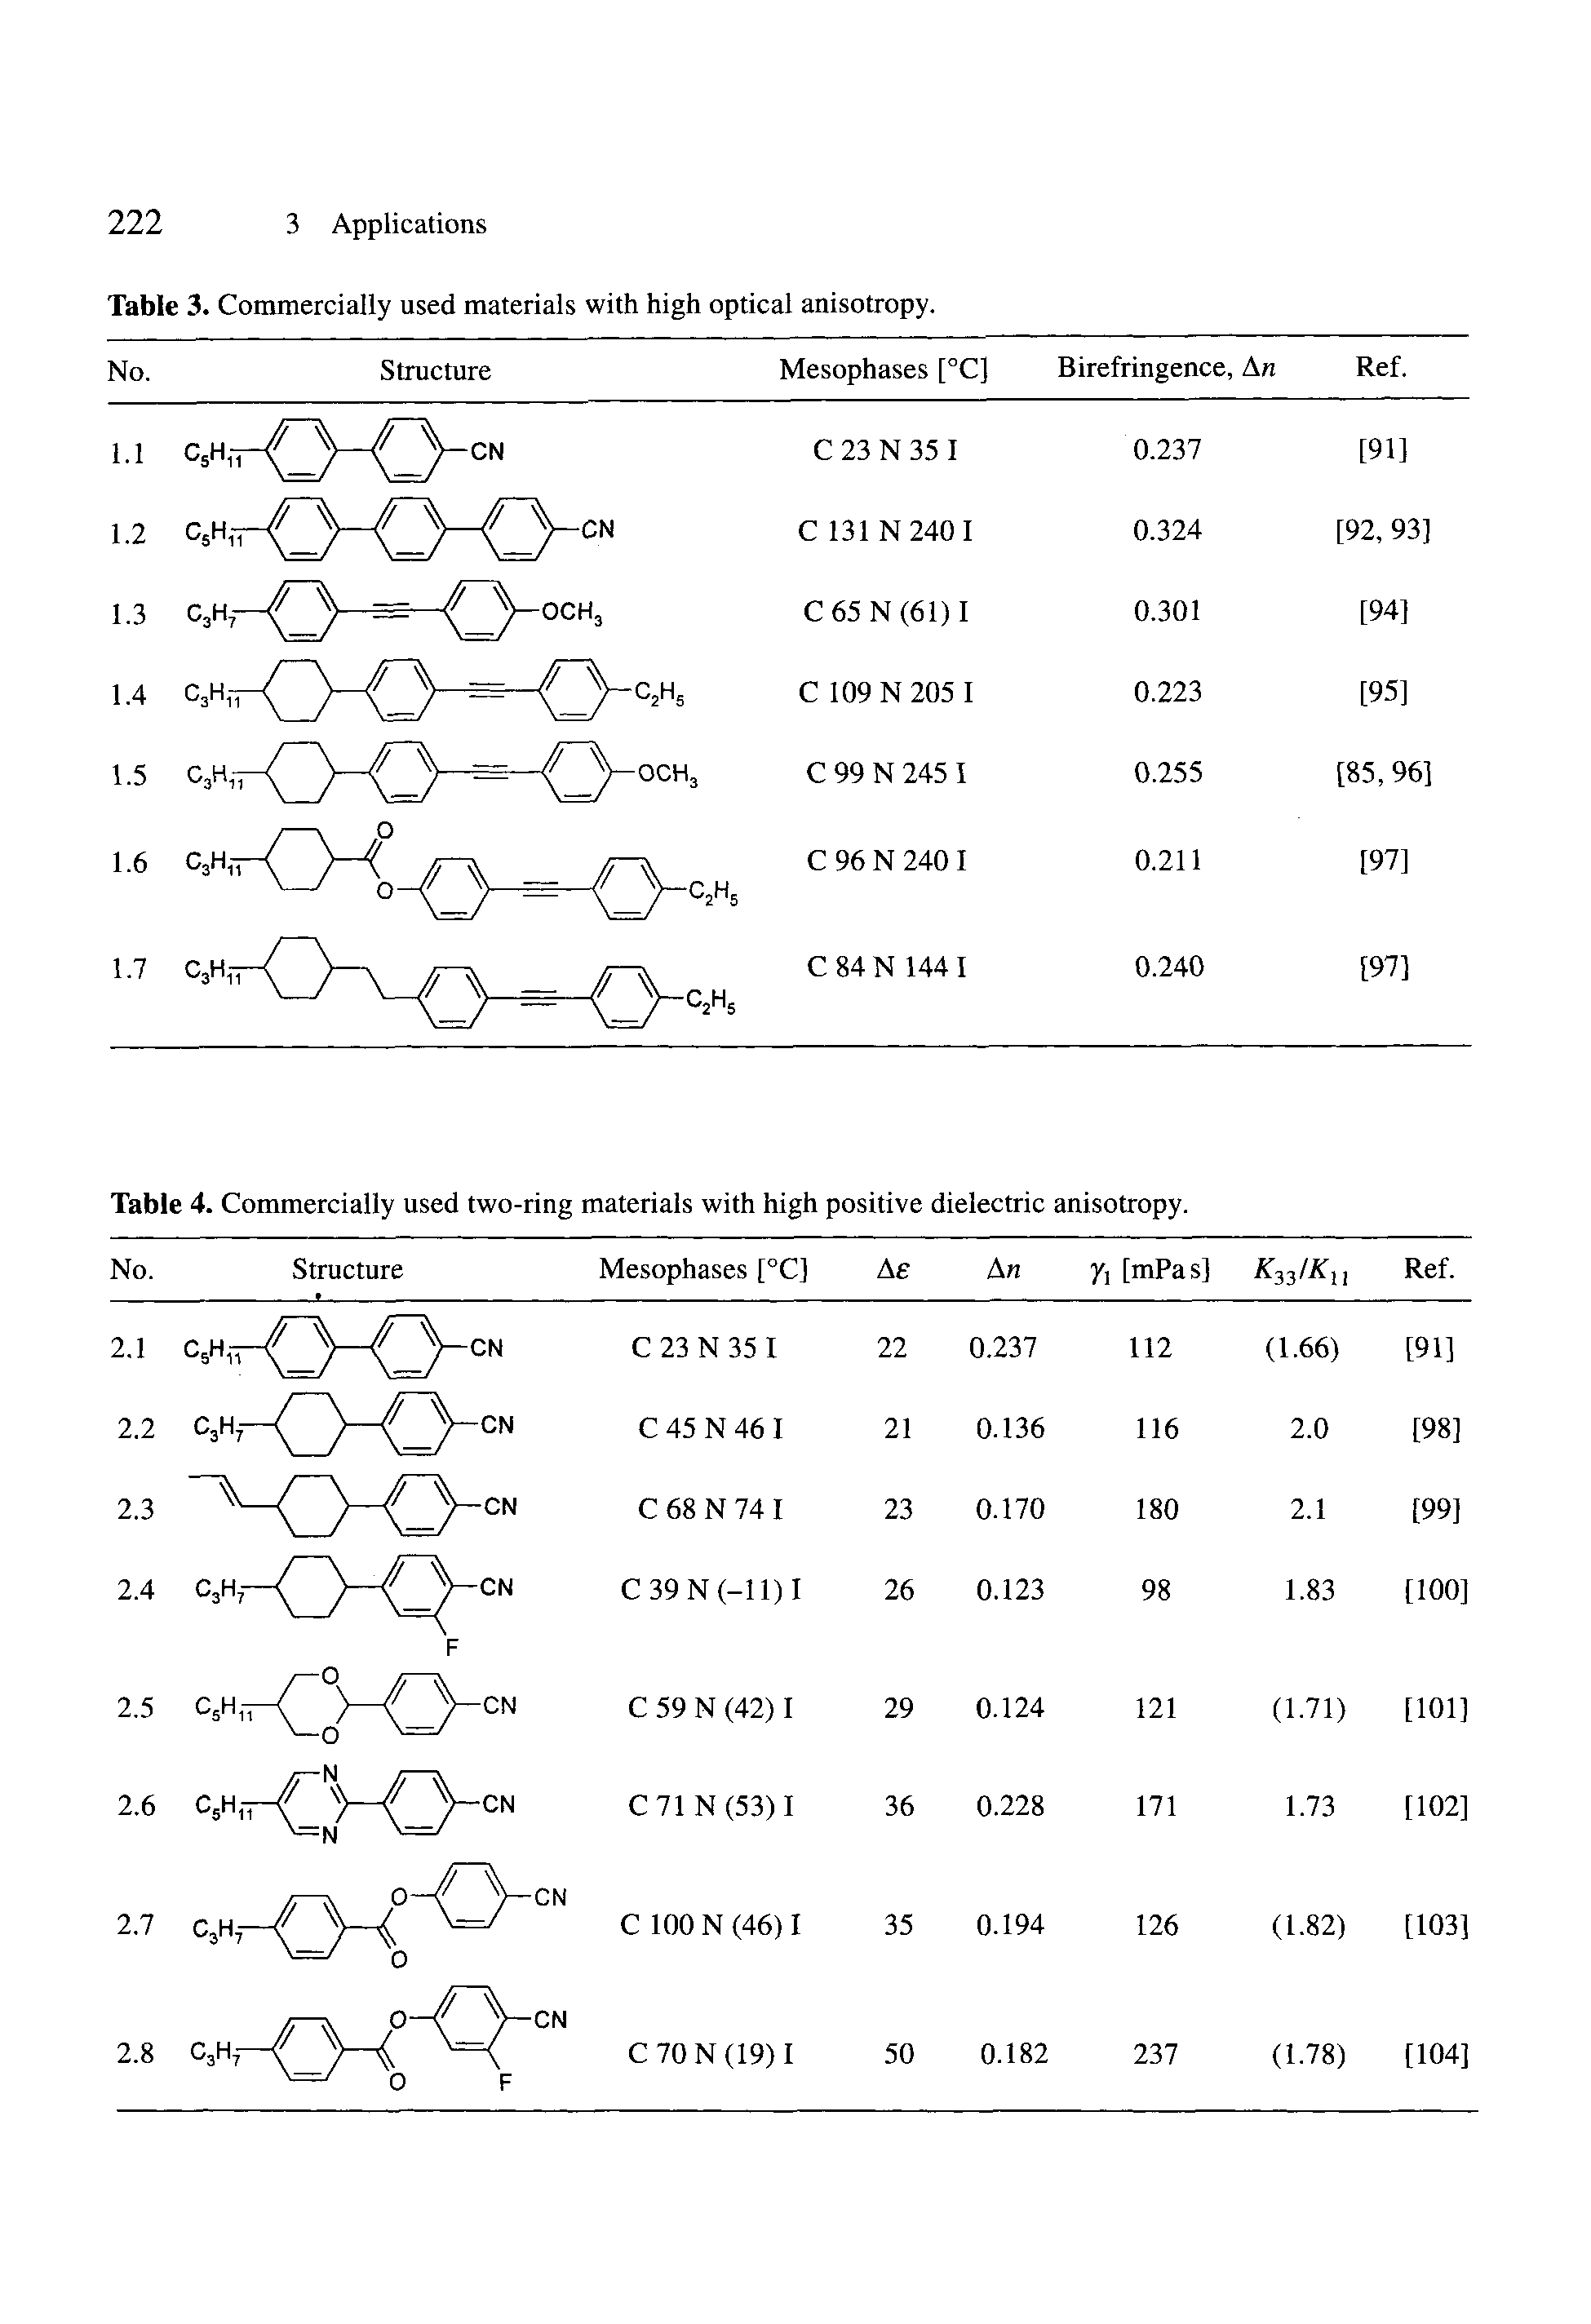 Table 4. Commercially used two-ring materials with high positive dielectric anisotropy.